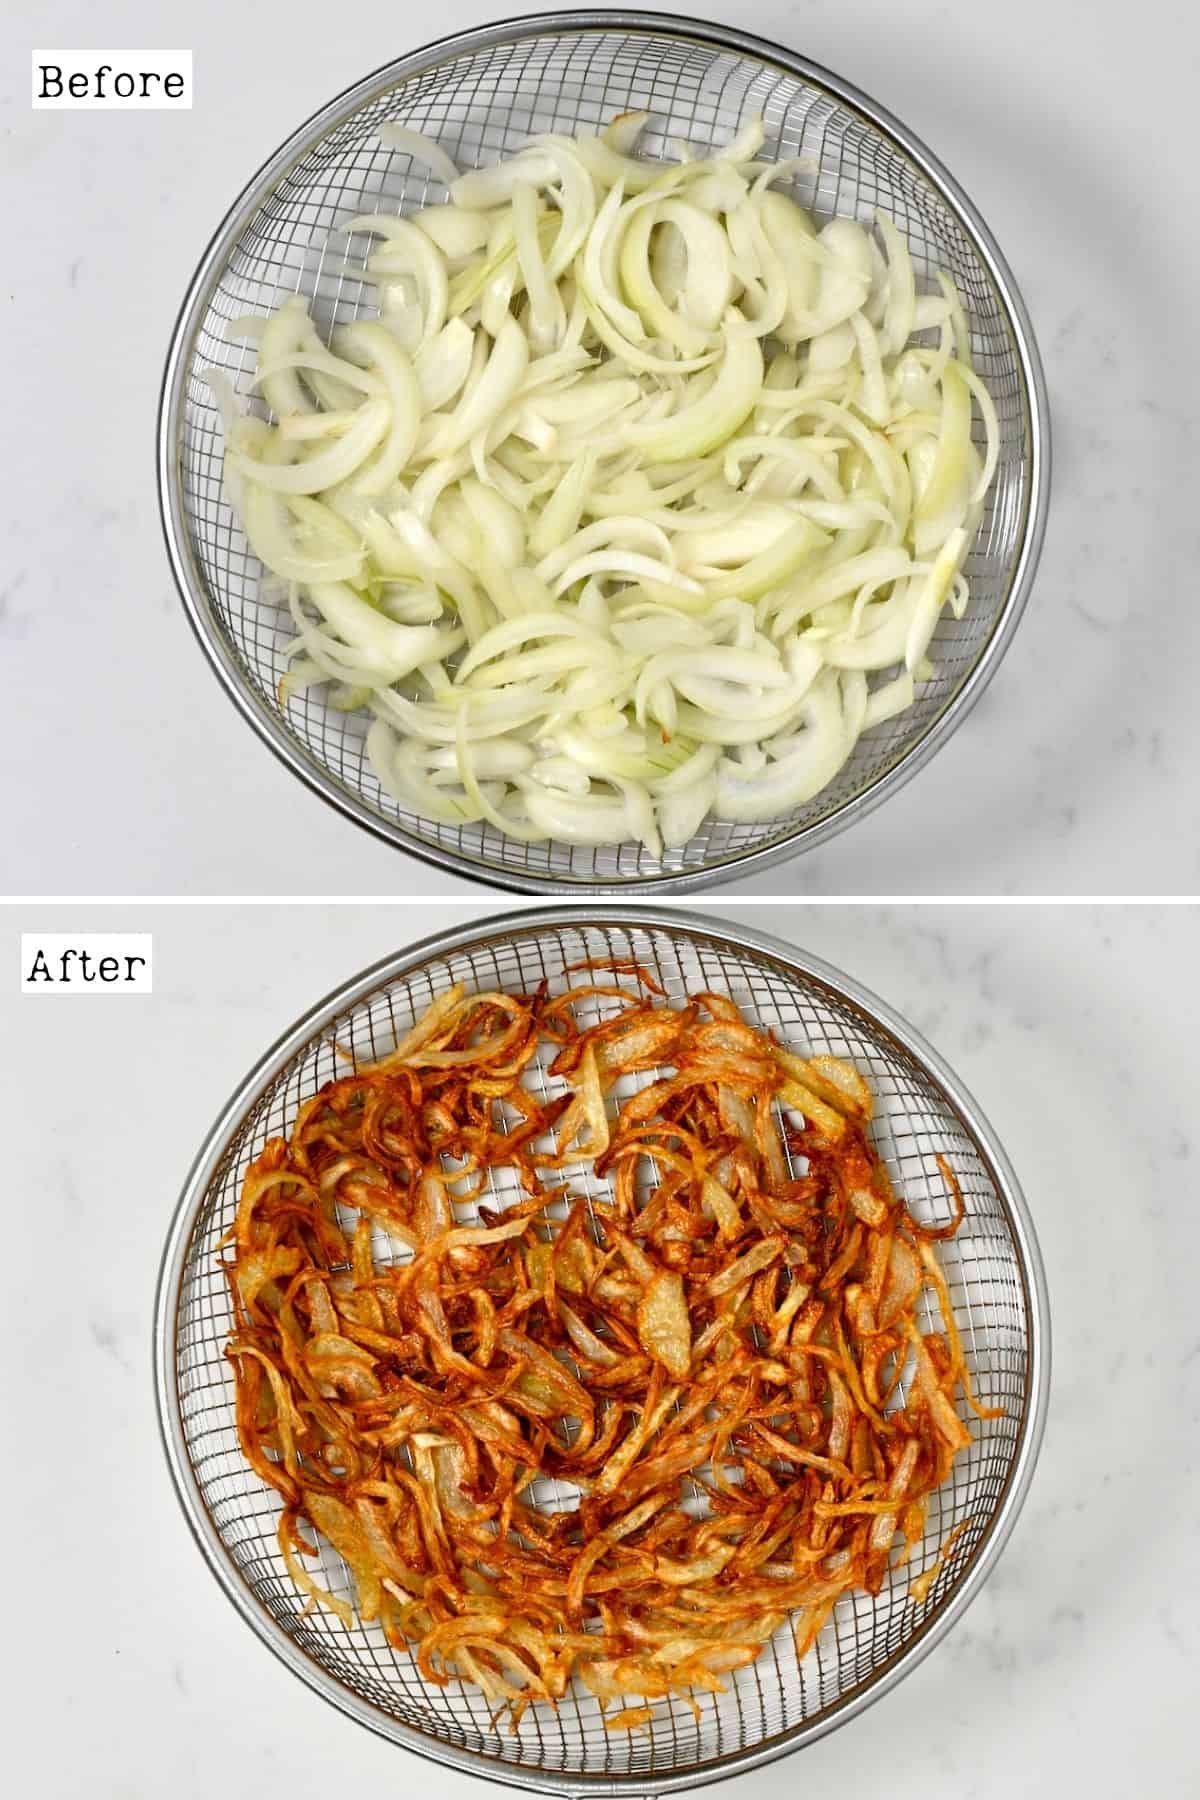 https://www.alphafoodie.com/wp-content/uploads/2021/08/Crispy-Fried-Onion-Before-and-after-frying-onion.jpg